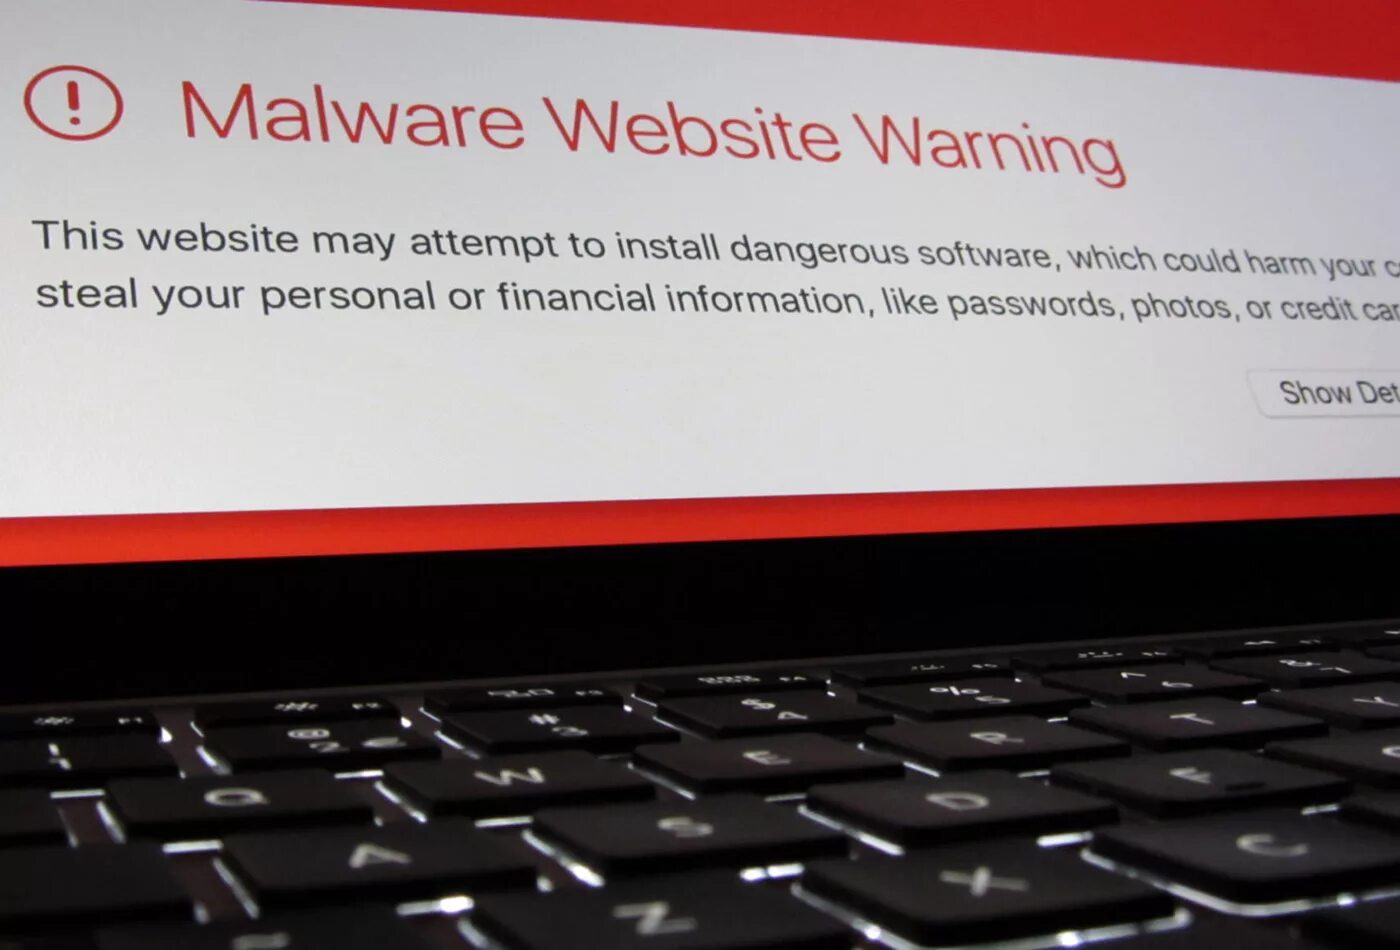 Malware. Malware Wallpaper. What is Malware in Russian. Malicious activity blocked. This site may